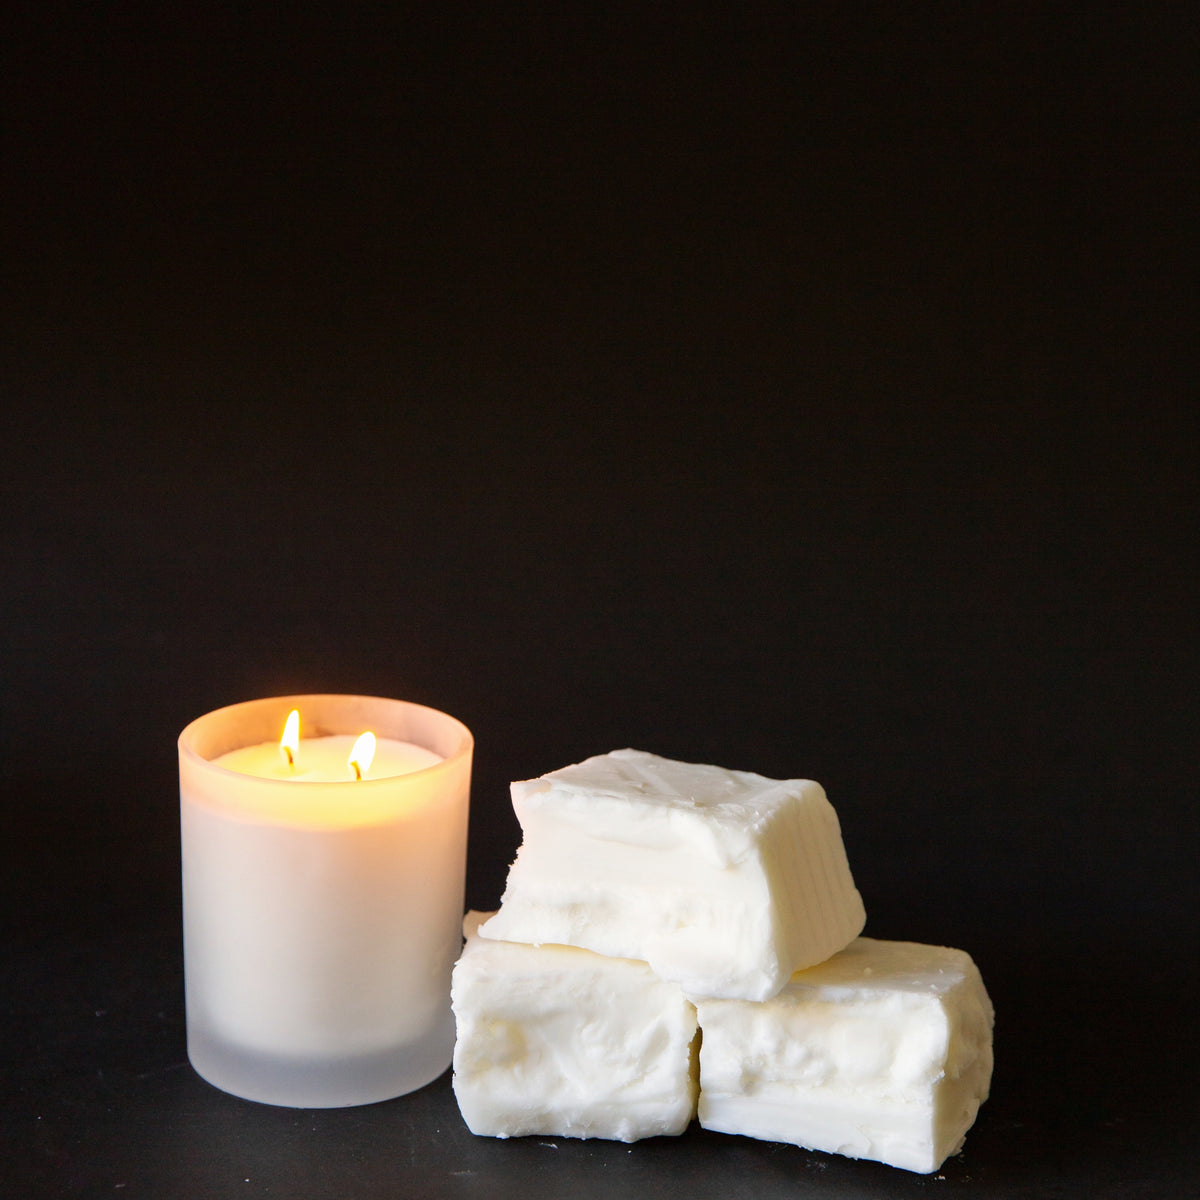 Coconut Wax vs Soy Wax: What's the Difference? – Hebe Botanica